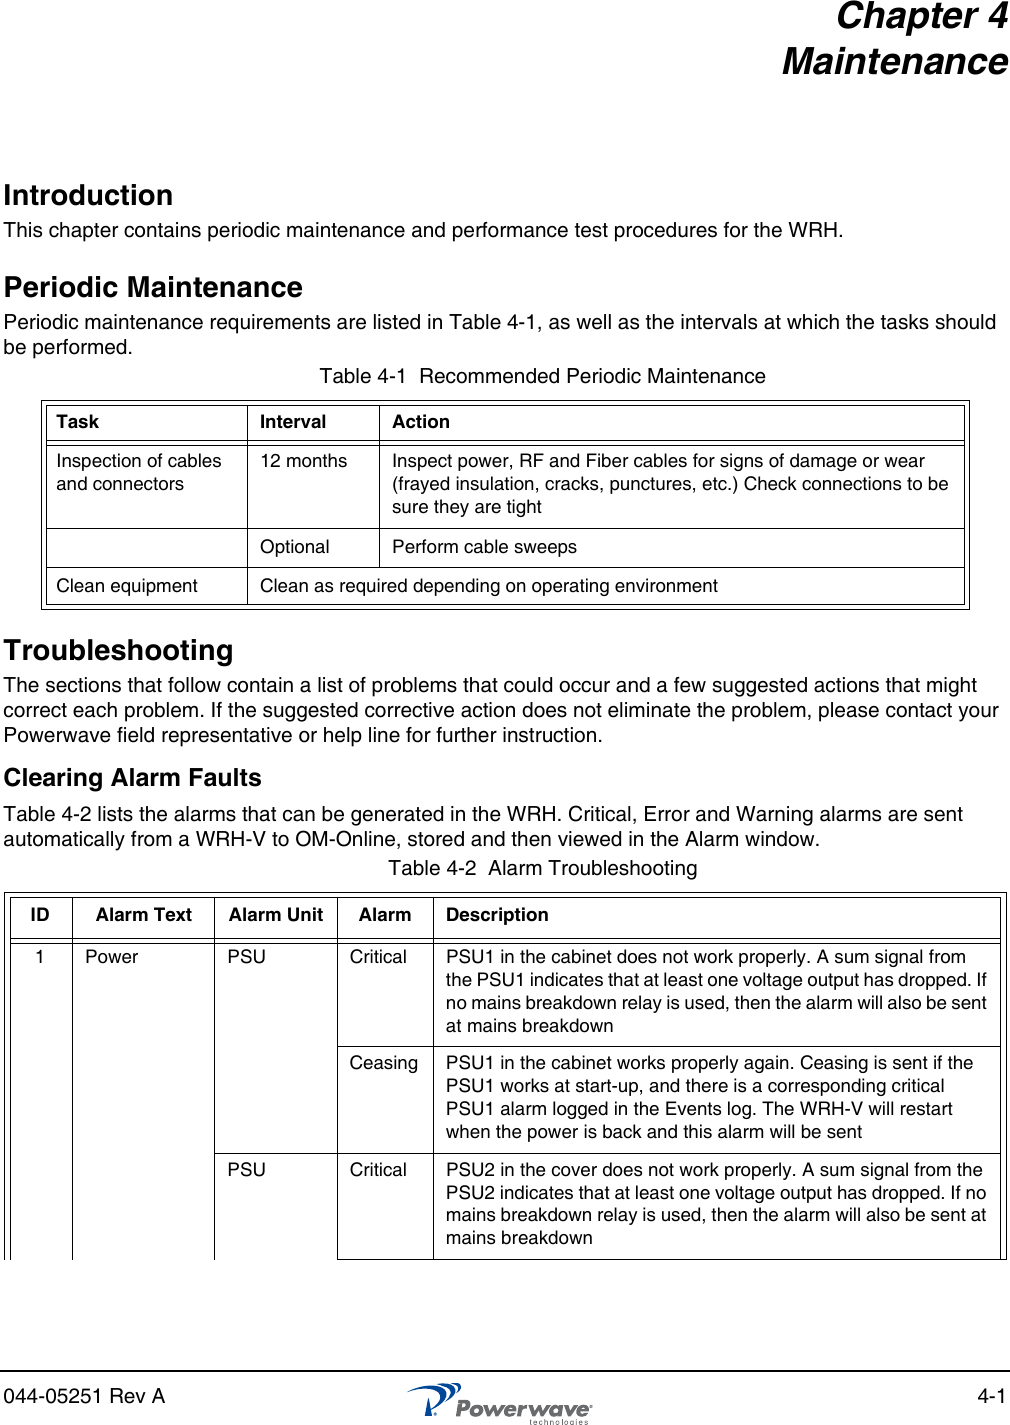 044-05251 Rev A 4-1Chapter 4 MaintenanceIntroductionThis chapter contains periodic maintenance and performance test procedures for the WRH.Periodic MaintenancePeriodic maintenance requirements are listed in Table 4-1, as well as the intervals at which the tasks should be performed.TroubleshootingThe sections that follow contain a list of problems that could occur and a few suggested actions that might correct each problem. If the suggested corrective action does not eliminate the problem, please contact your Powerwave field representative or help line for further instruction.Clearing Alarm FaultsTable 4-2 lists the alarms that can be generated in the WRH. Critical, Error and Warning alarms are sent automatically from a WRH-V to OM-Online, stored and then viewed in the Alarm window.Table 4-1  Recommended Periodic MaintenanceTask Interval ActionInspection of cables and connectors12 months Inspect power, RF and Fiber cables for signs of damage or wear (frayed insulation, cracks, punctures, etc.) Check connections to be sure they are tightOptional Perform cable sweepsClean equipment Clean as required depending on operating environmentTable 4-2  Alarm Troubleshooting ID Alarm Text Alarm Unit Alarm Description1 Power PSU Critical PSU1 in the cabinet does not work properly. A sum signal from the PSU1 indicates that at least one voltage output has dropped. If no mains breakdown relay is used, then the alarm will also be sent at mains breakdownCeasing PSU1 in the cabinet works properly again. Ceasing is sent if the PSU1 works at start-up, and there is a corresponding critical PSU1 alarm logged in the Events log. The WRH-V will restart when the power is back and this alarm will be sentPSU Critical PSU2 in the cover does not work properly. A sum signal from the PSU2 indicates that at least one voltage output has dropped. If no mains breakdown relay is used, then the alarm will also be sent at mains breakdown